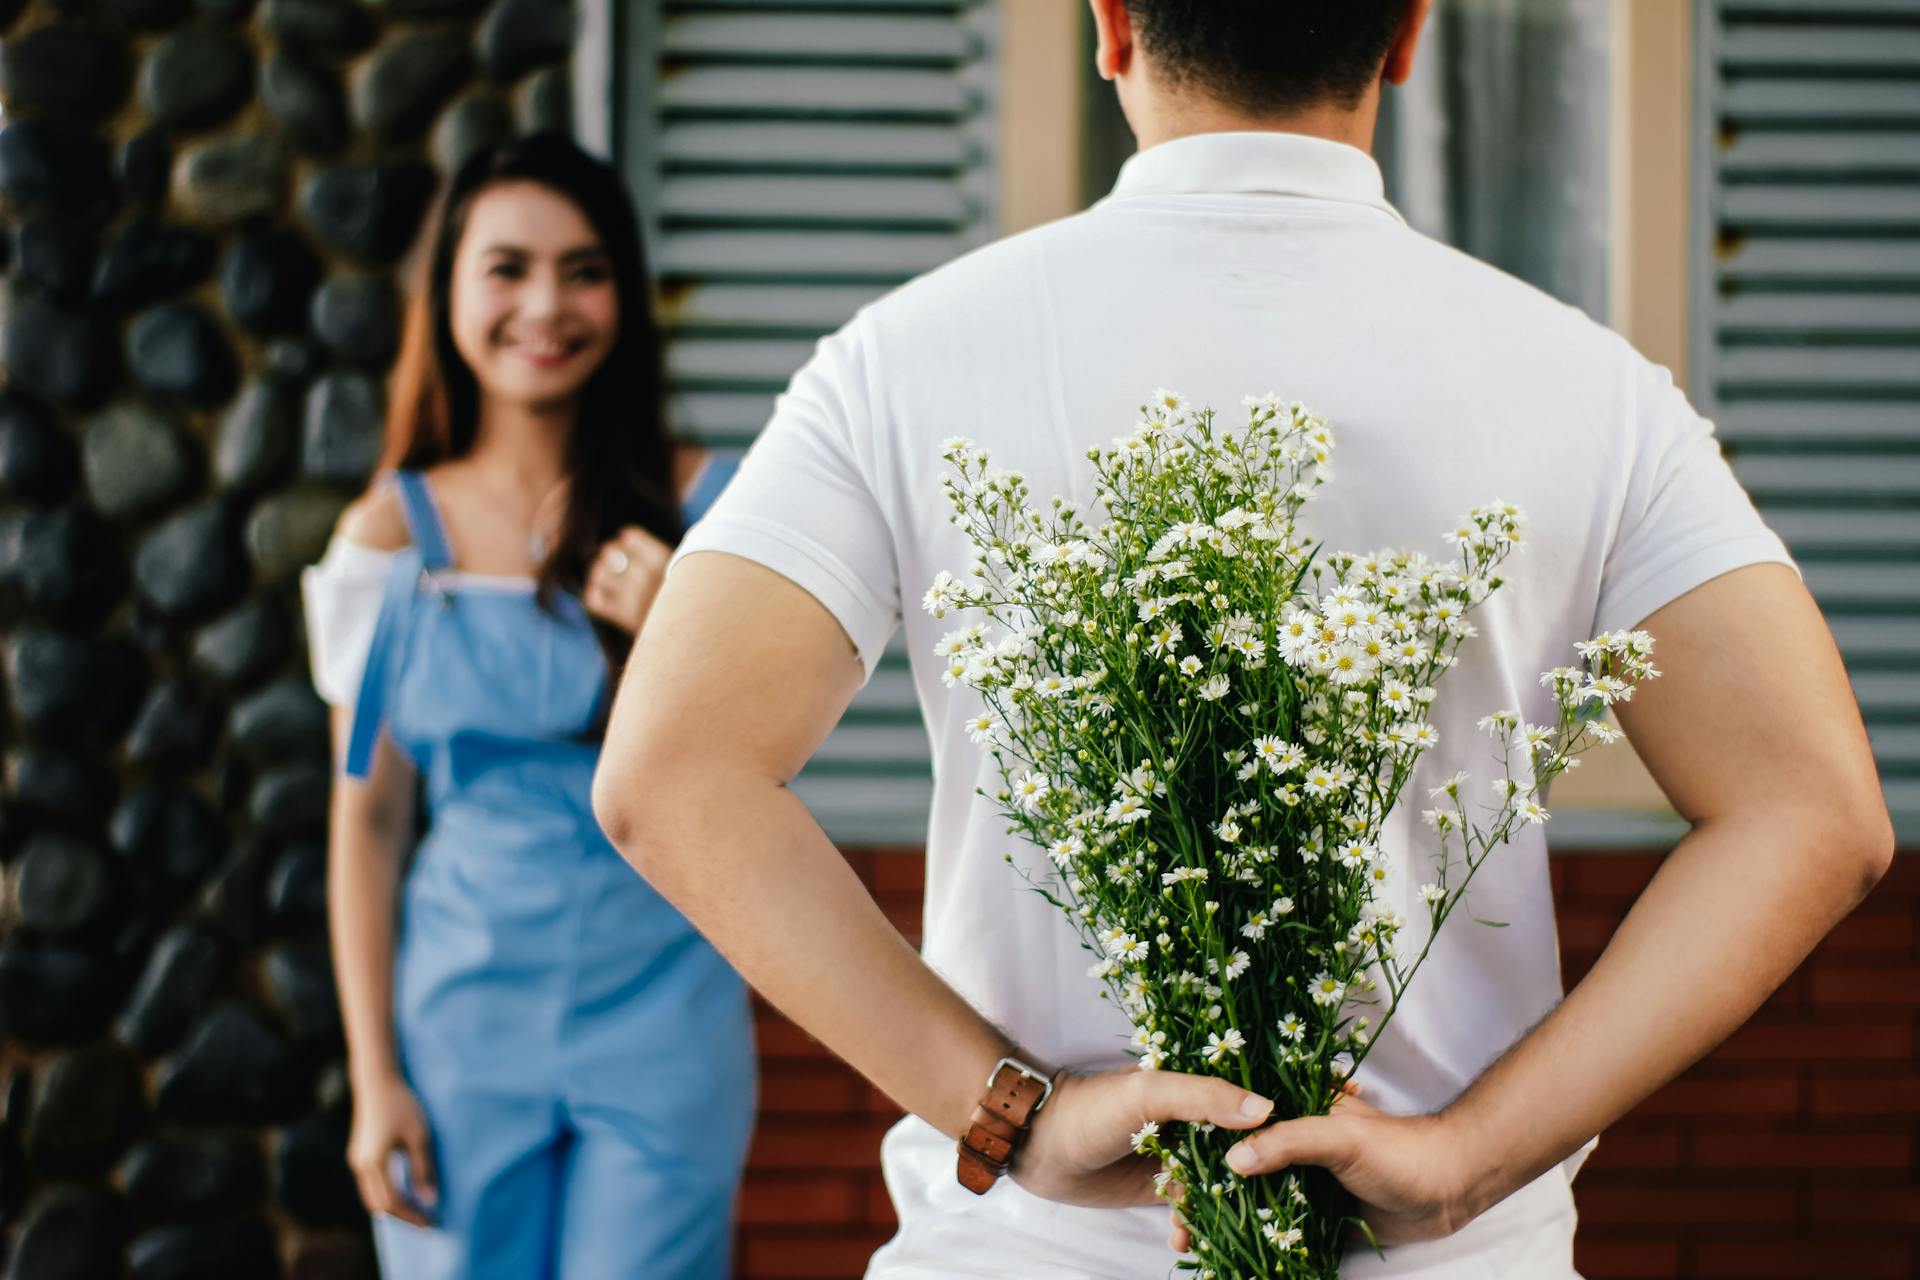 A man hiding flowers behind his back for his girlfriend | Source: Pexels